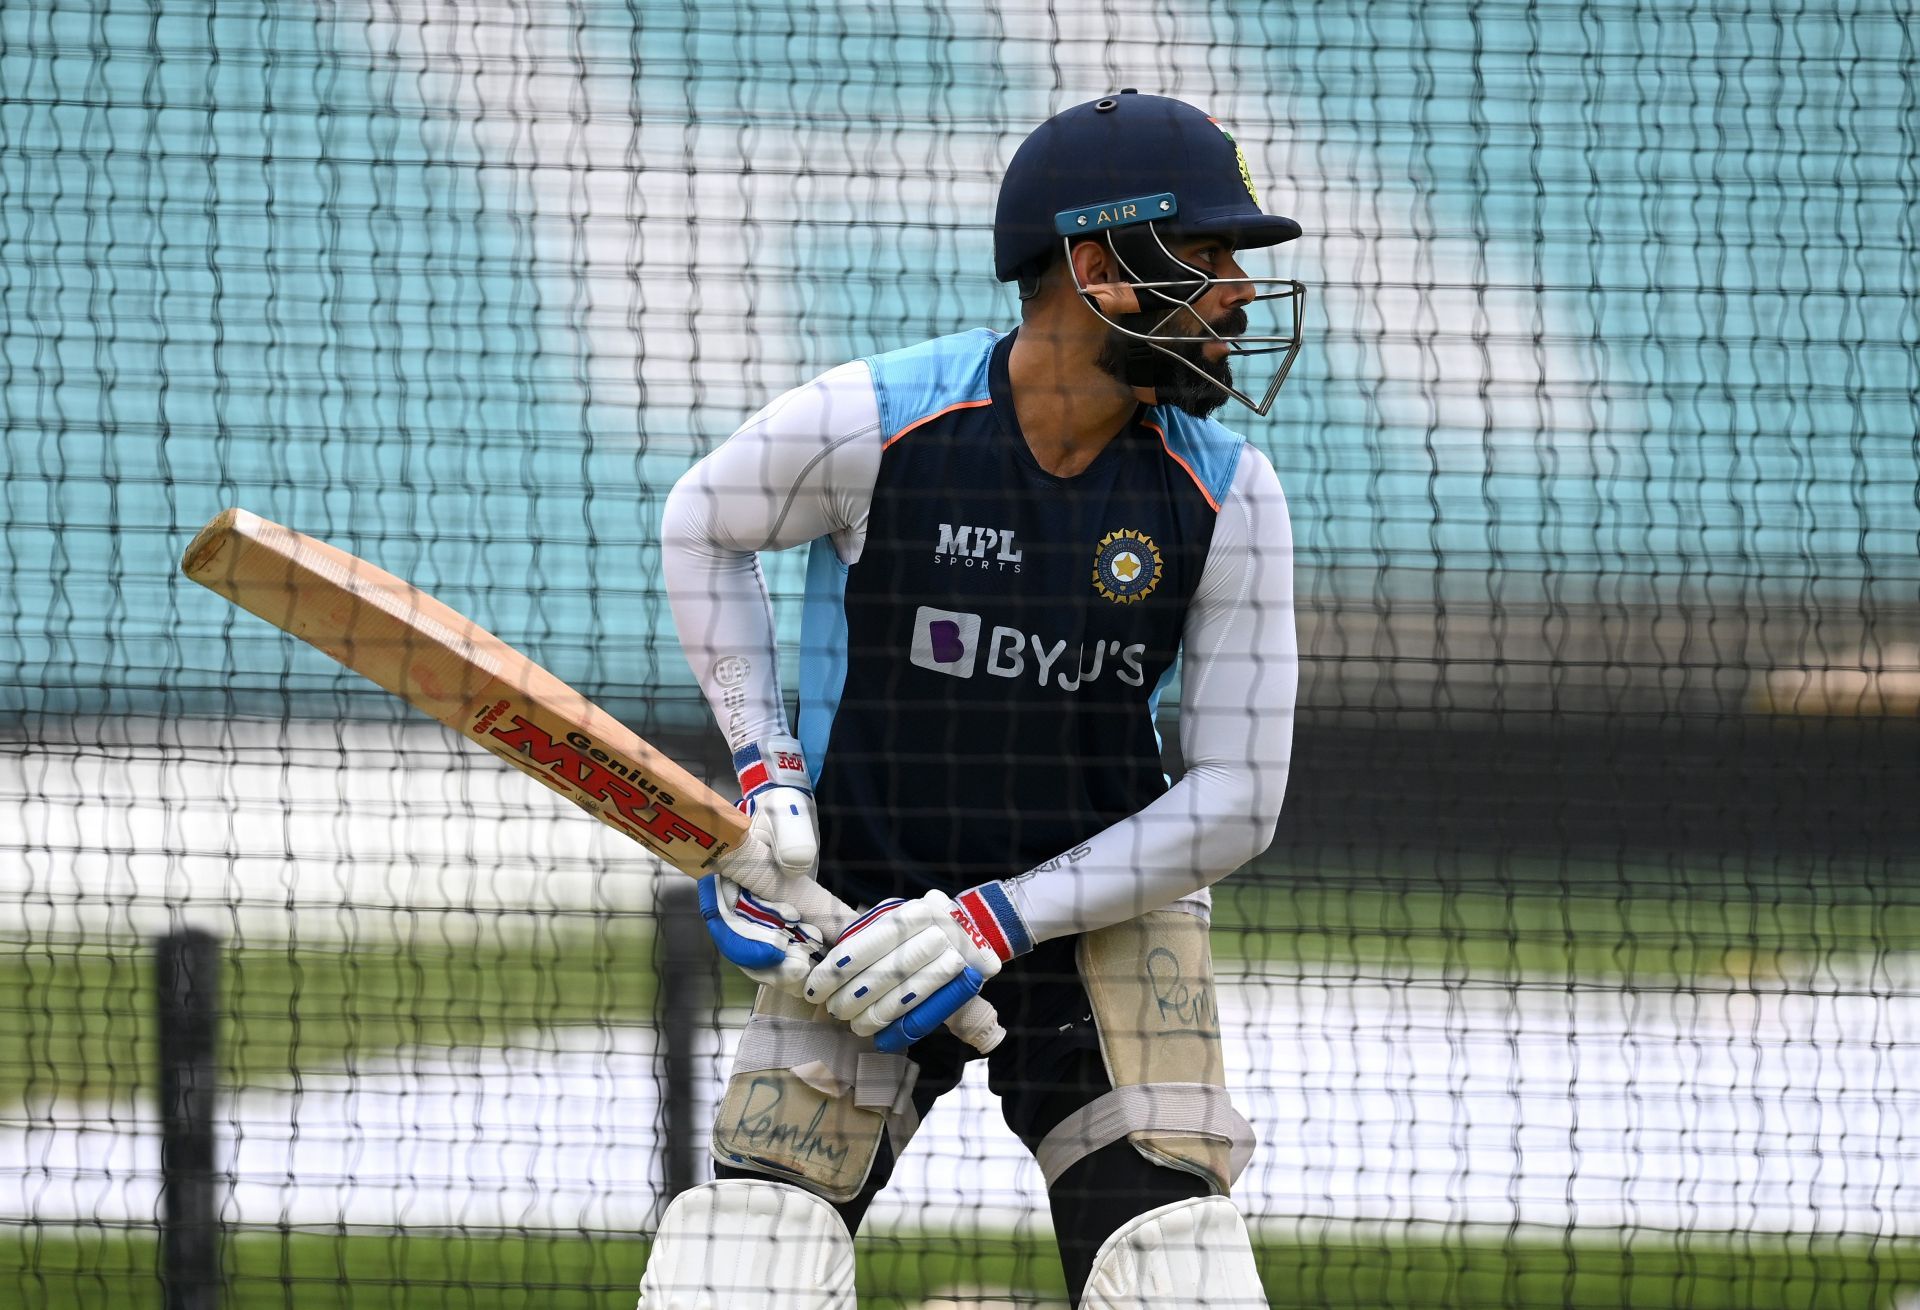 Virat Kohli has been putting in the hard yards in the nets